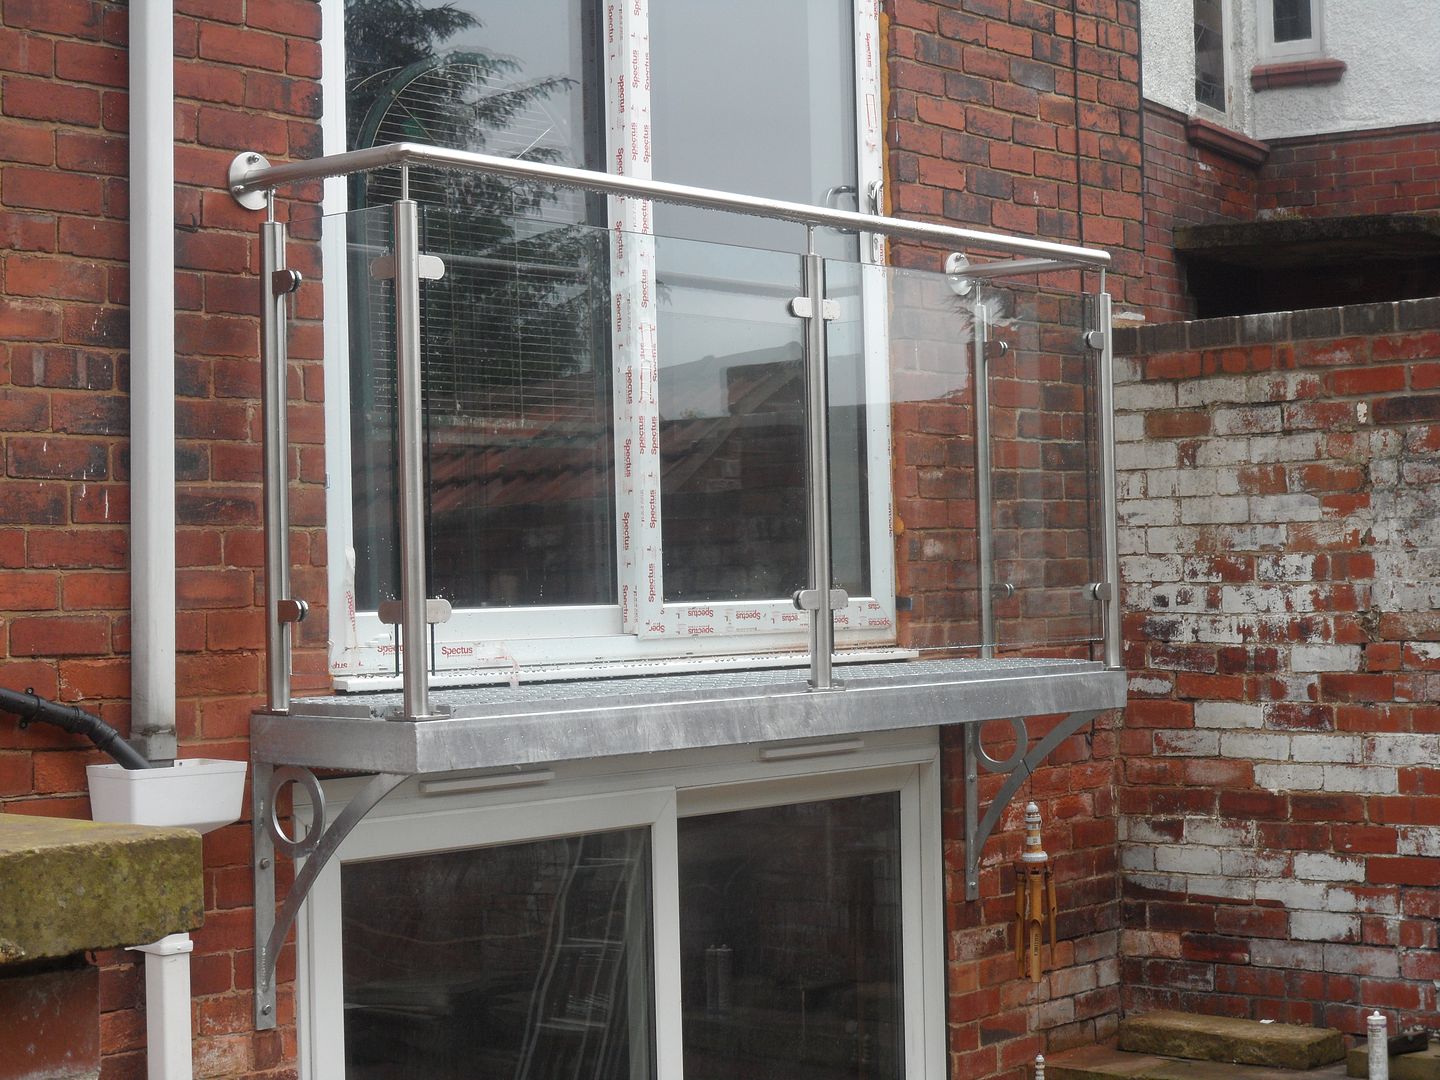 Walk out balcony balustrade with mesh flooring and glass balustrade